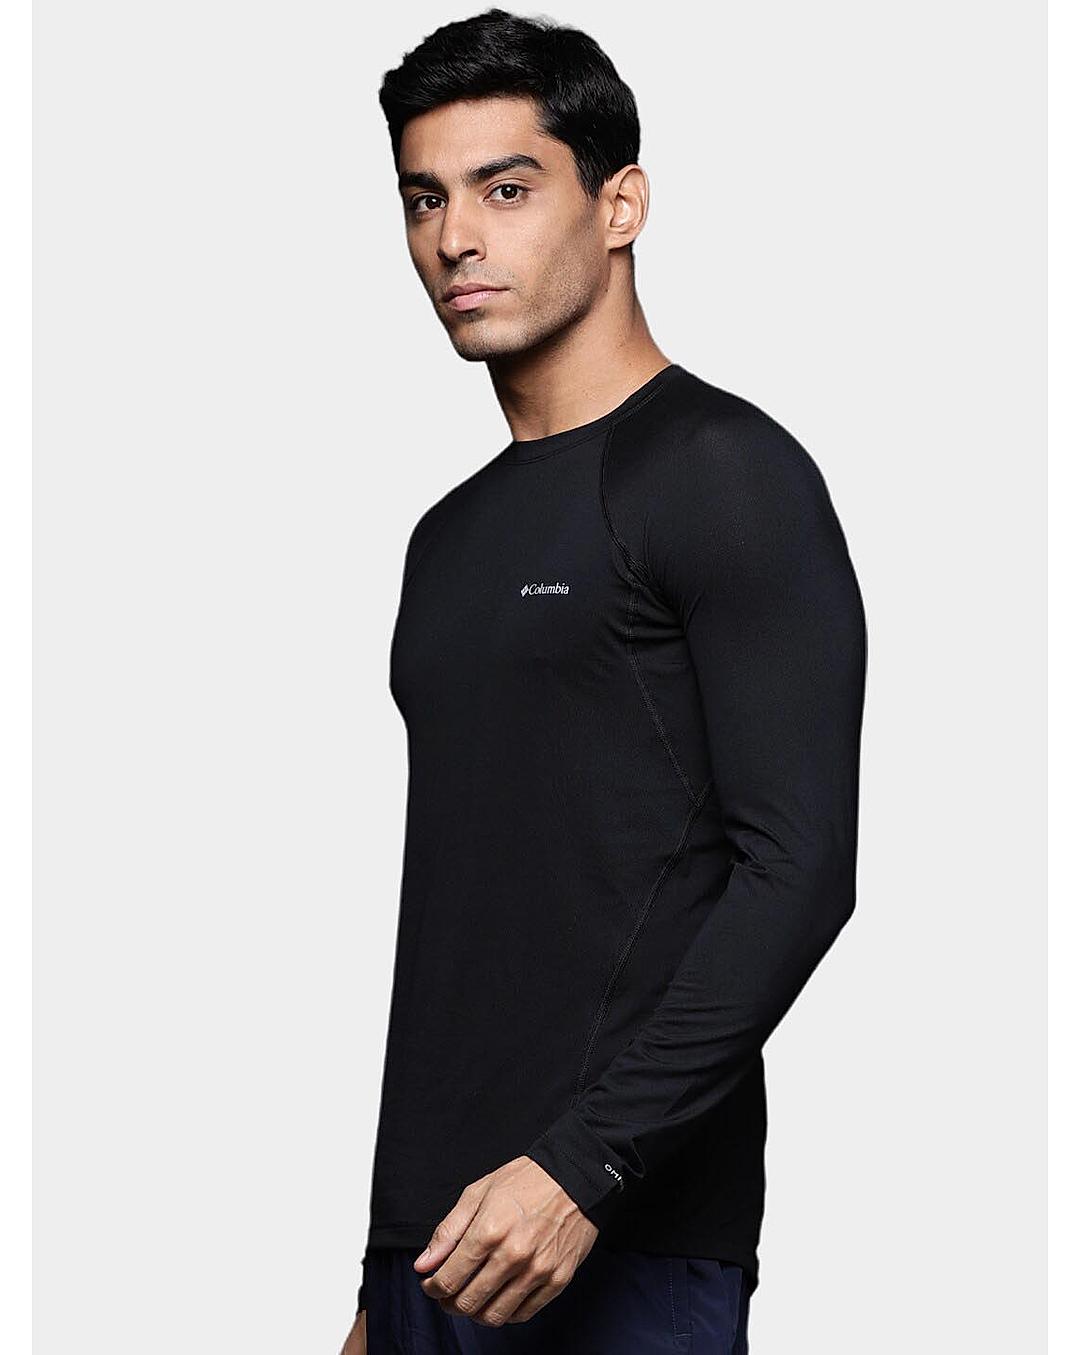 Buy Columbia Black Midweight Stretch Long Sleeve Top For Men Online at  Adventuras